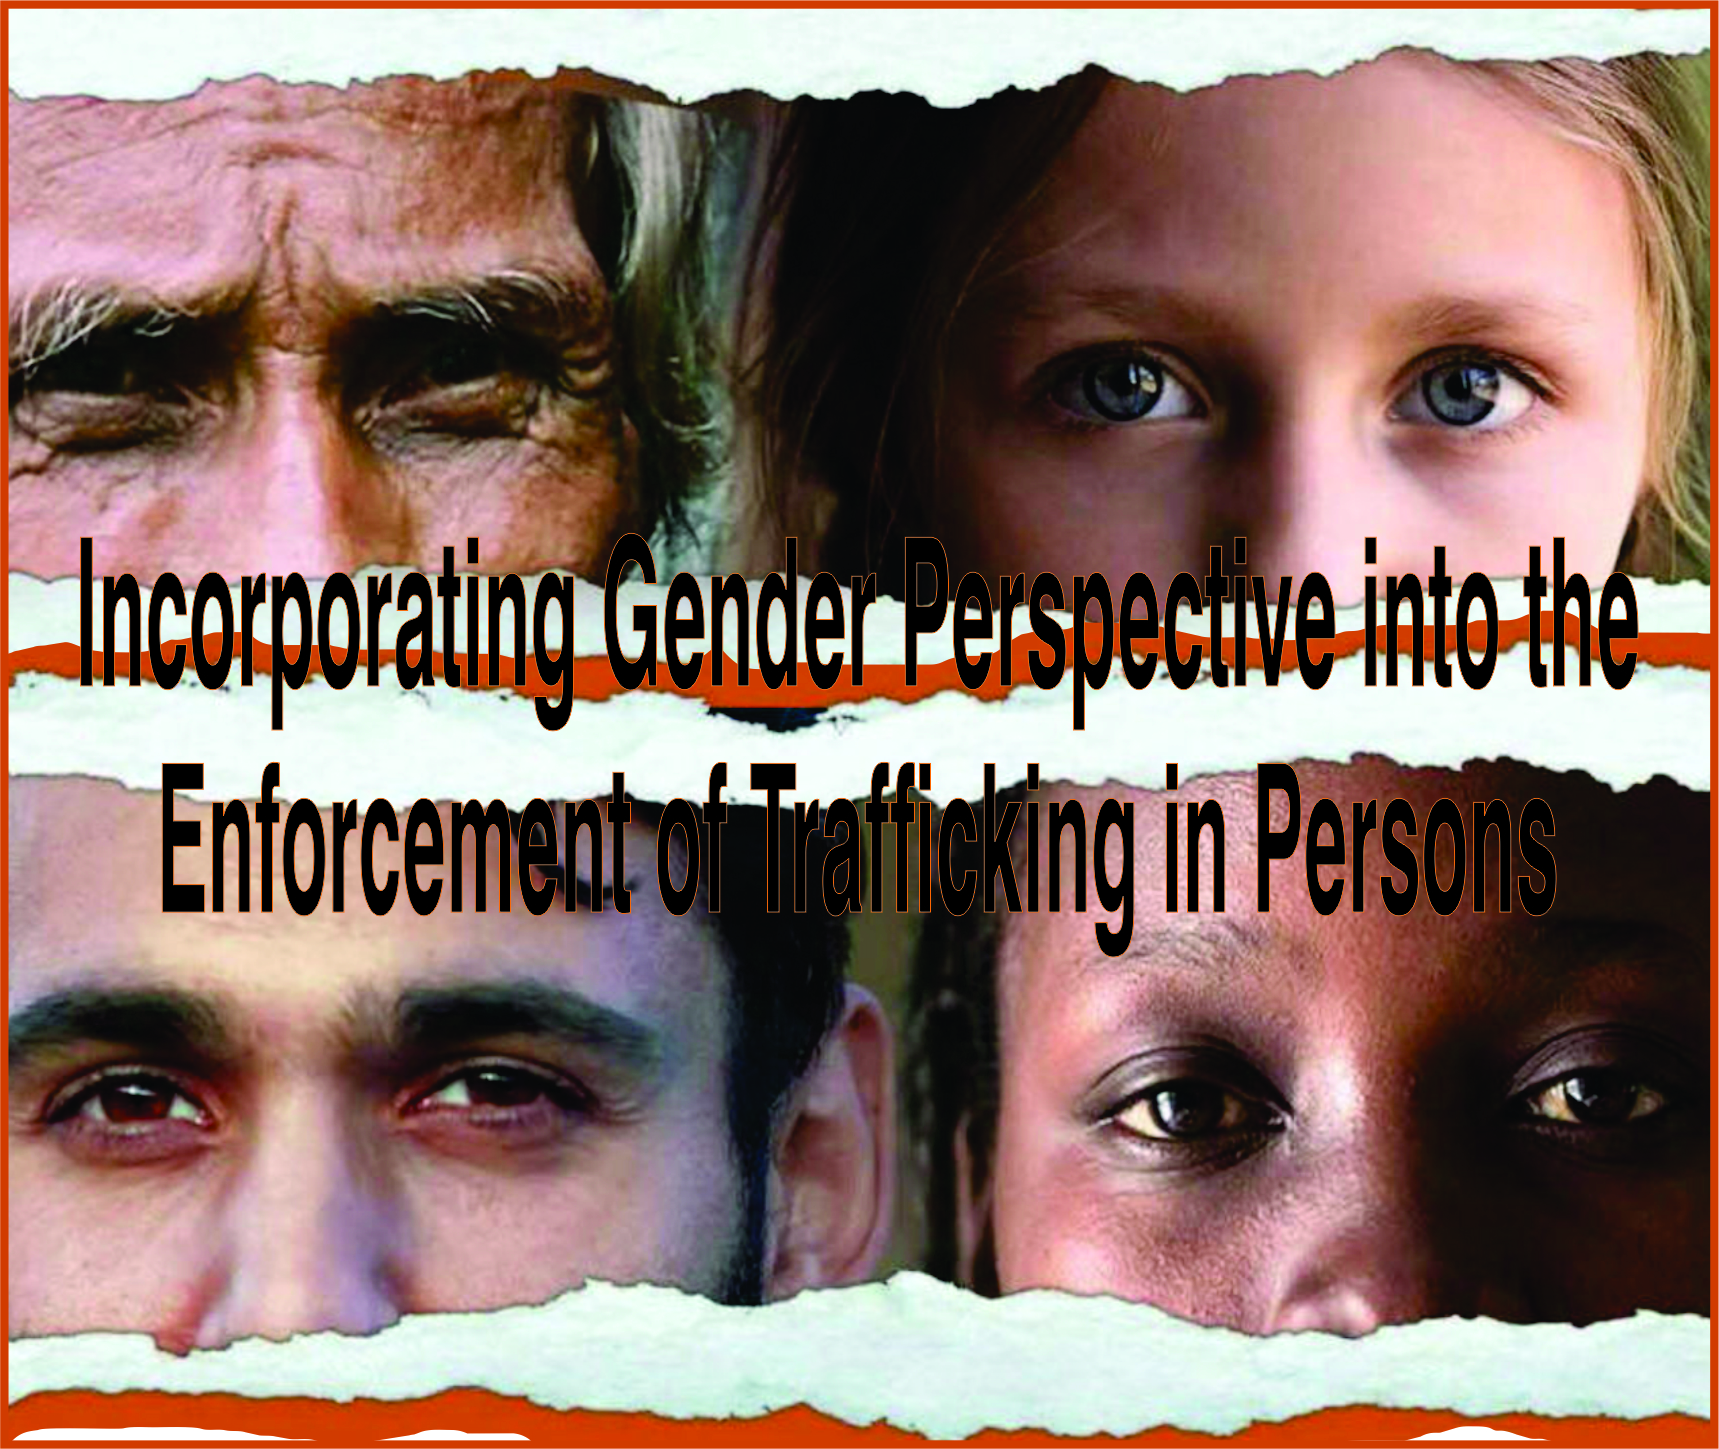 You are currently viewing Incorporating Gender Perspective into the Enforcement of Trafficking in Persons